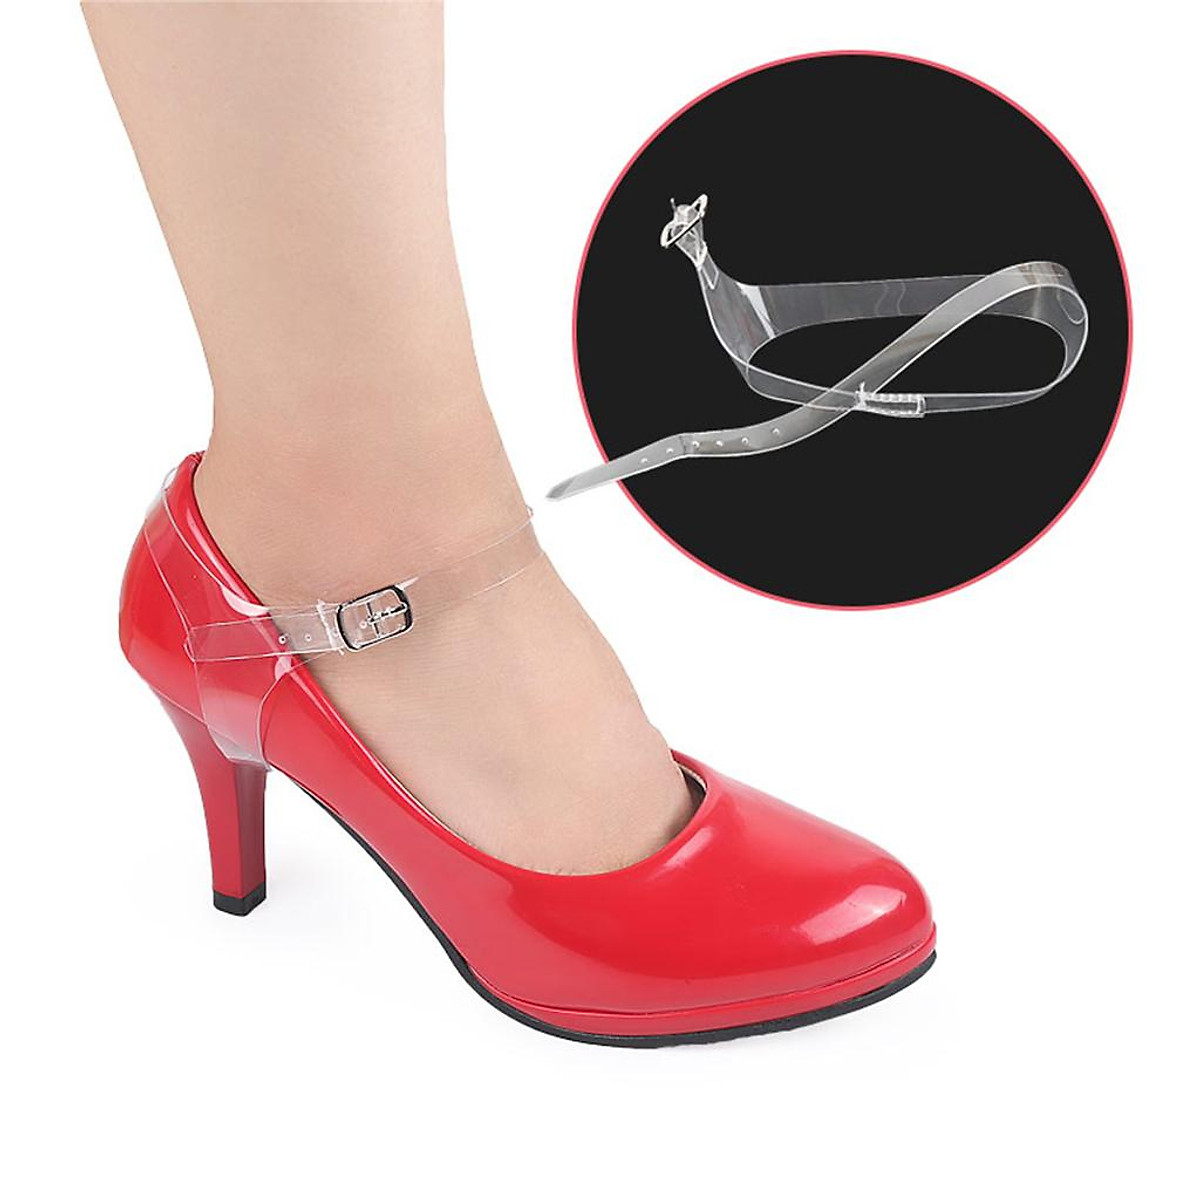 2 Pair Women's Transparent Invisible Shoe Straps Hold Loose High Heel Shoes